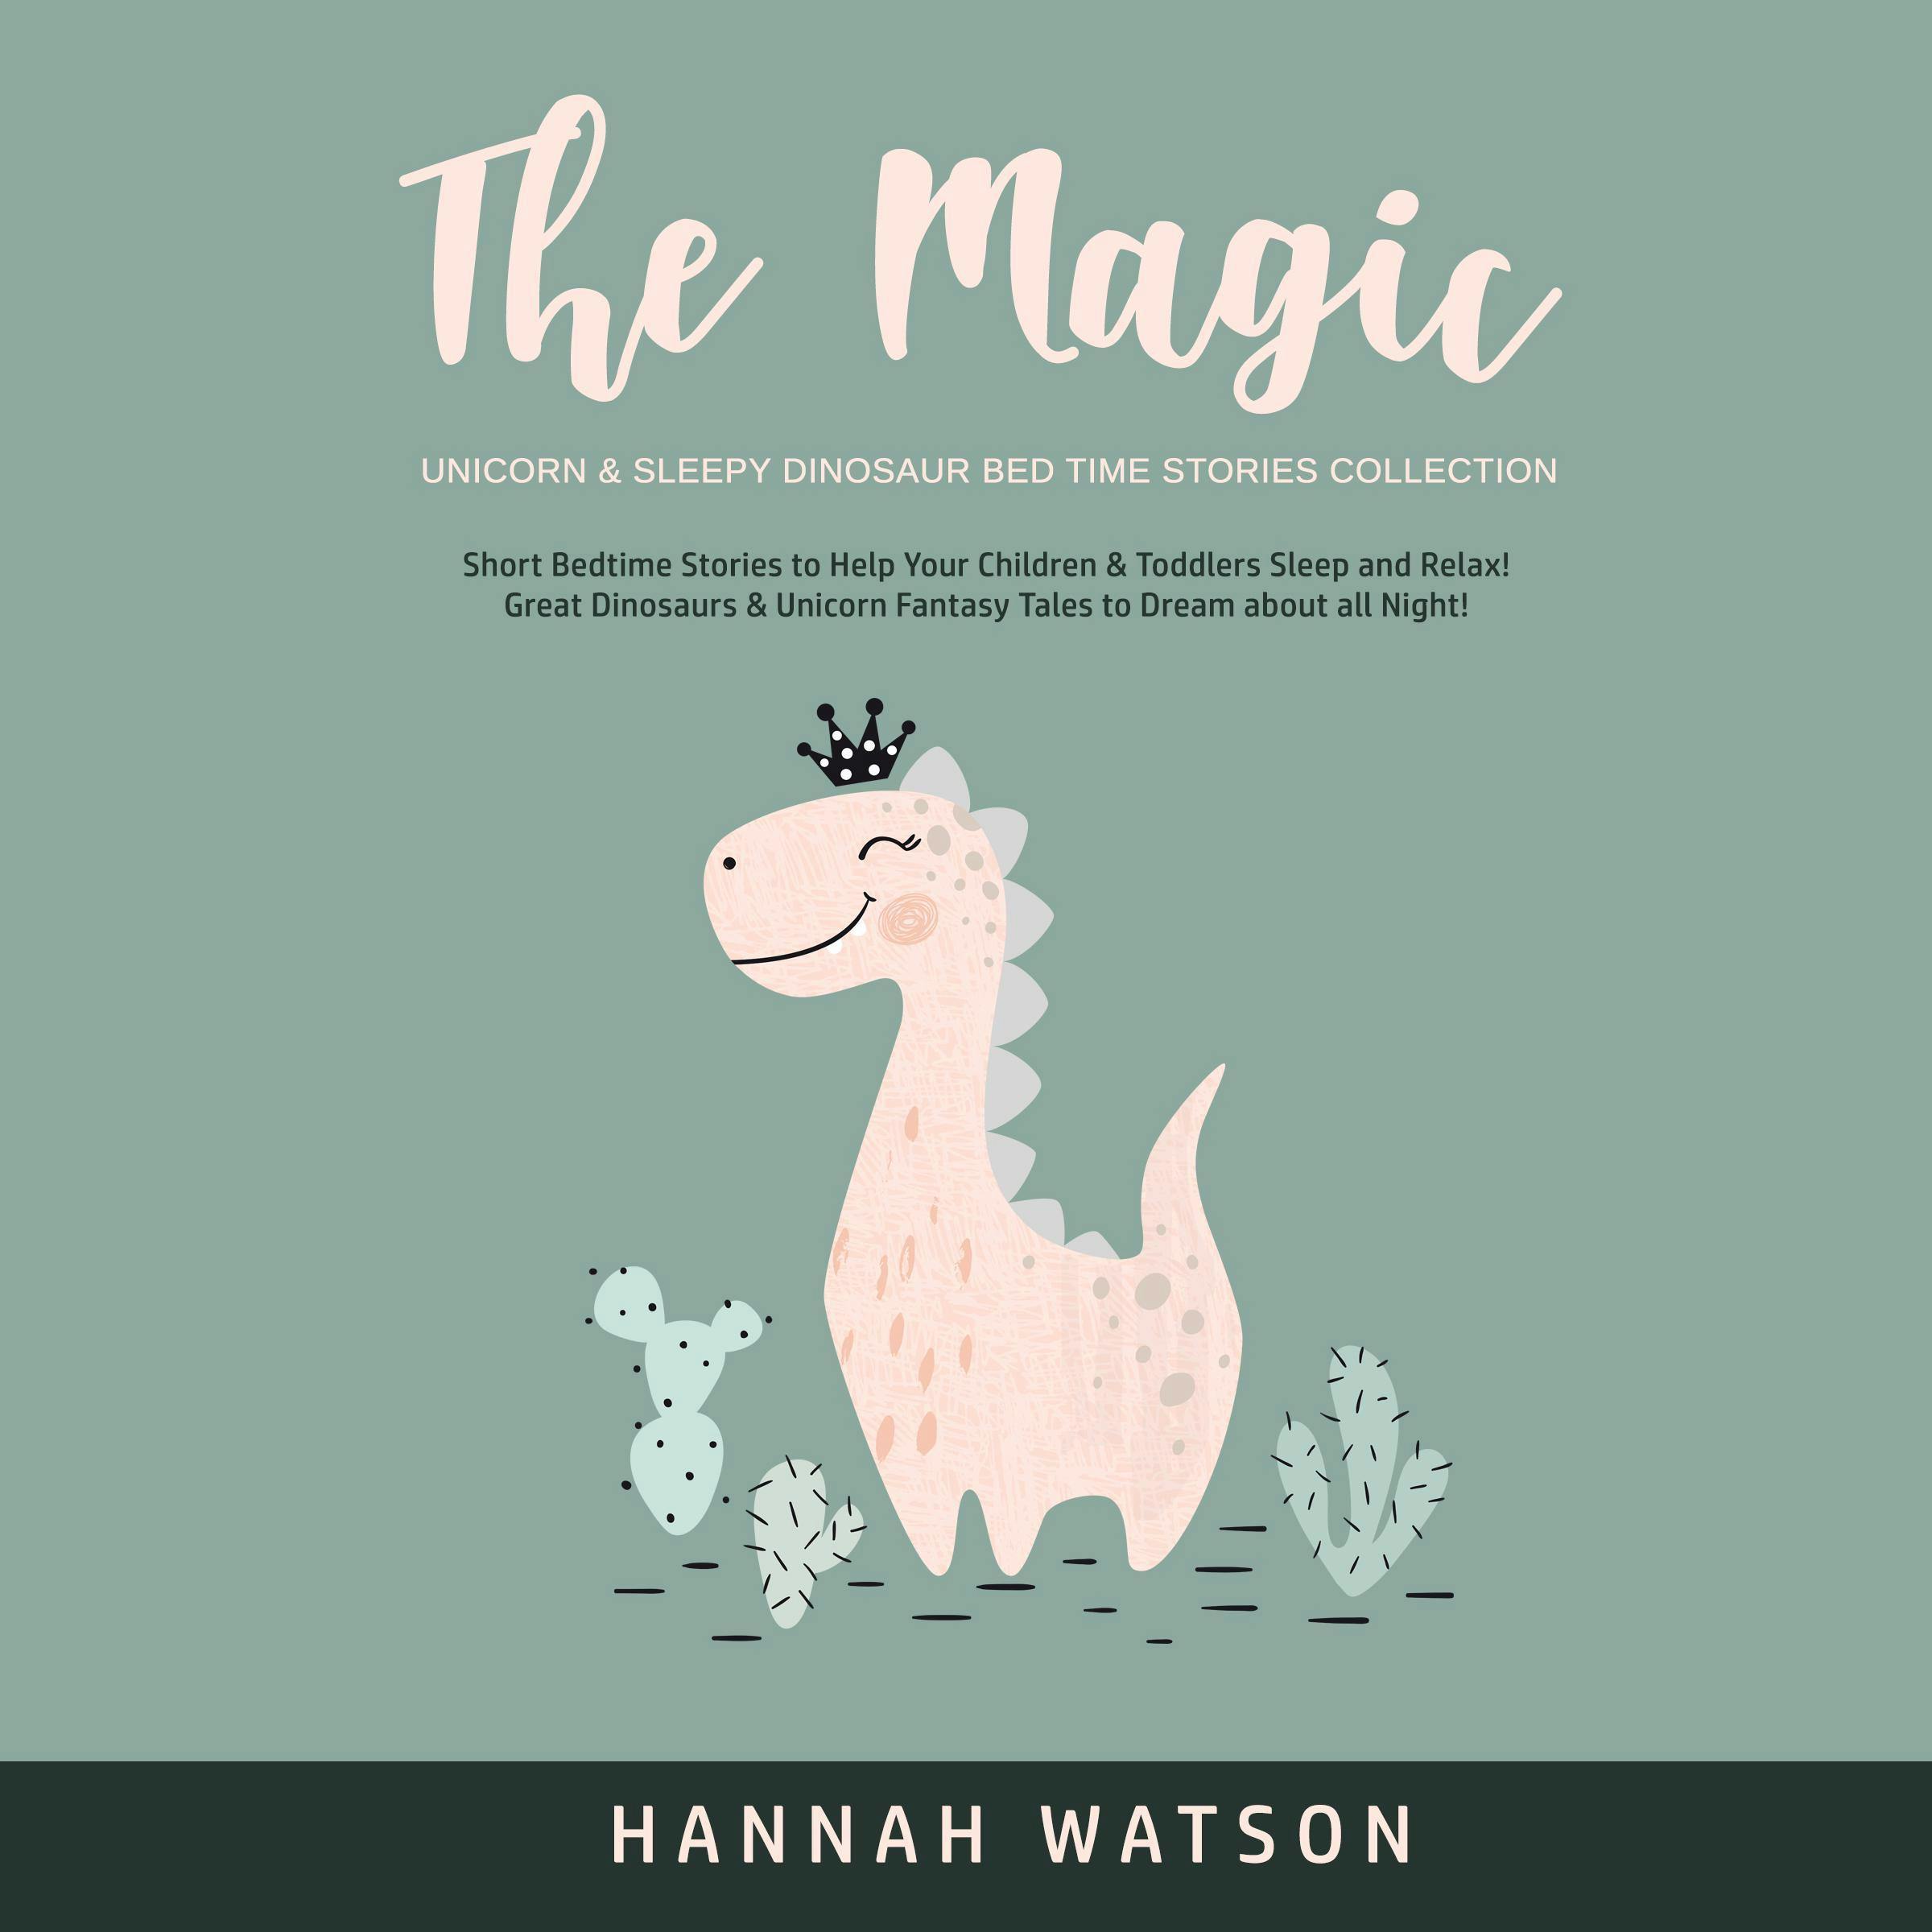 The Magic Unicorn & Sleepy Dinosaur Bed Time Stories Collection: Short Bedtime Stories to Help Your Children & Toddlers Sleep and Relax! Great Dinosaurs & Unicorn Fantasy Tales to Dream About All Night! - Hannah Watson